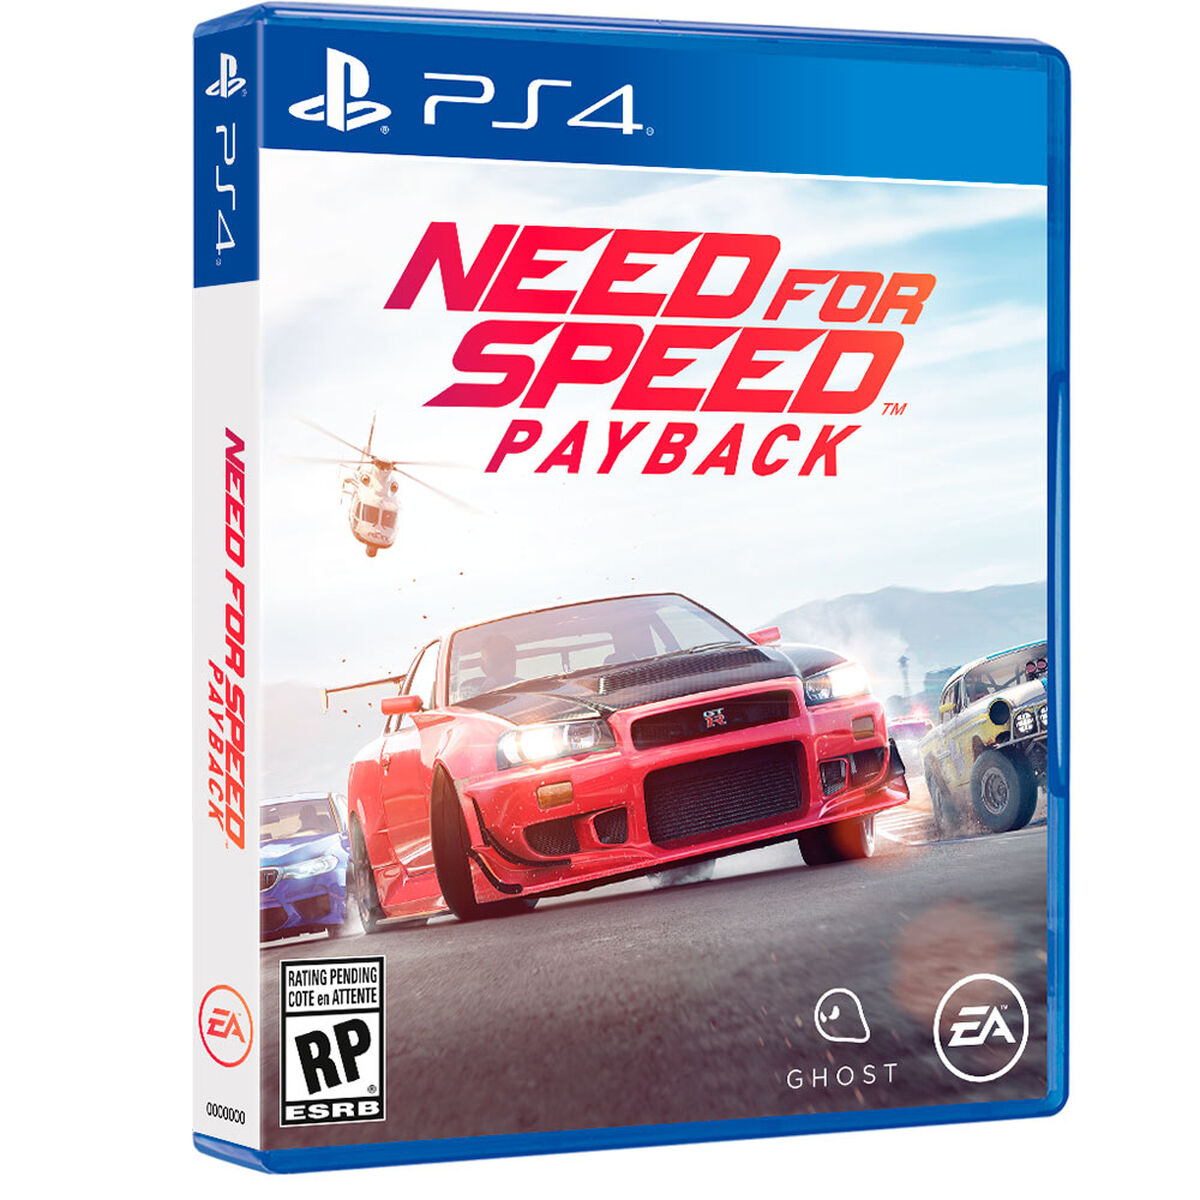 Juego PS4 Need for Speed Payback